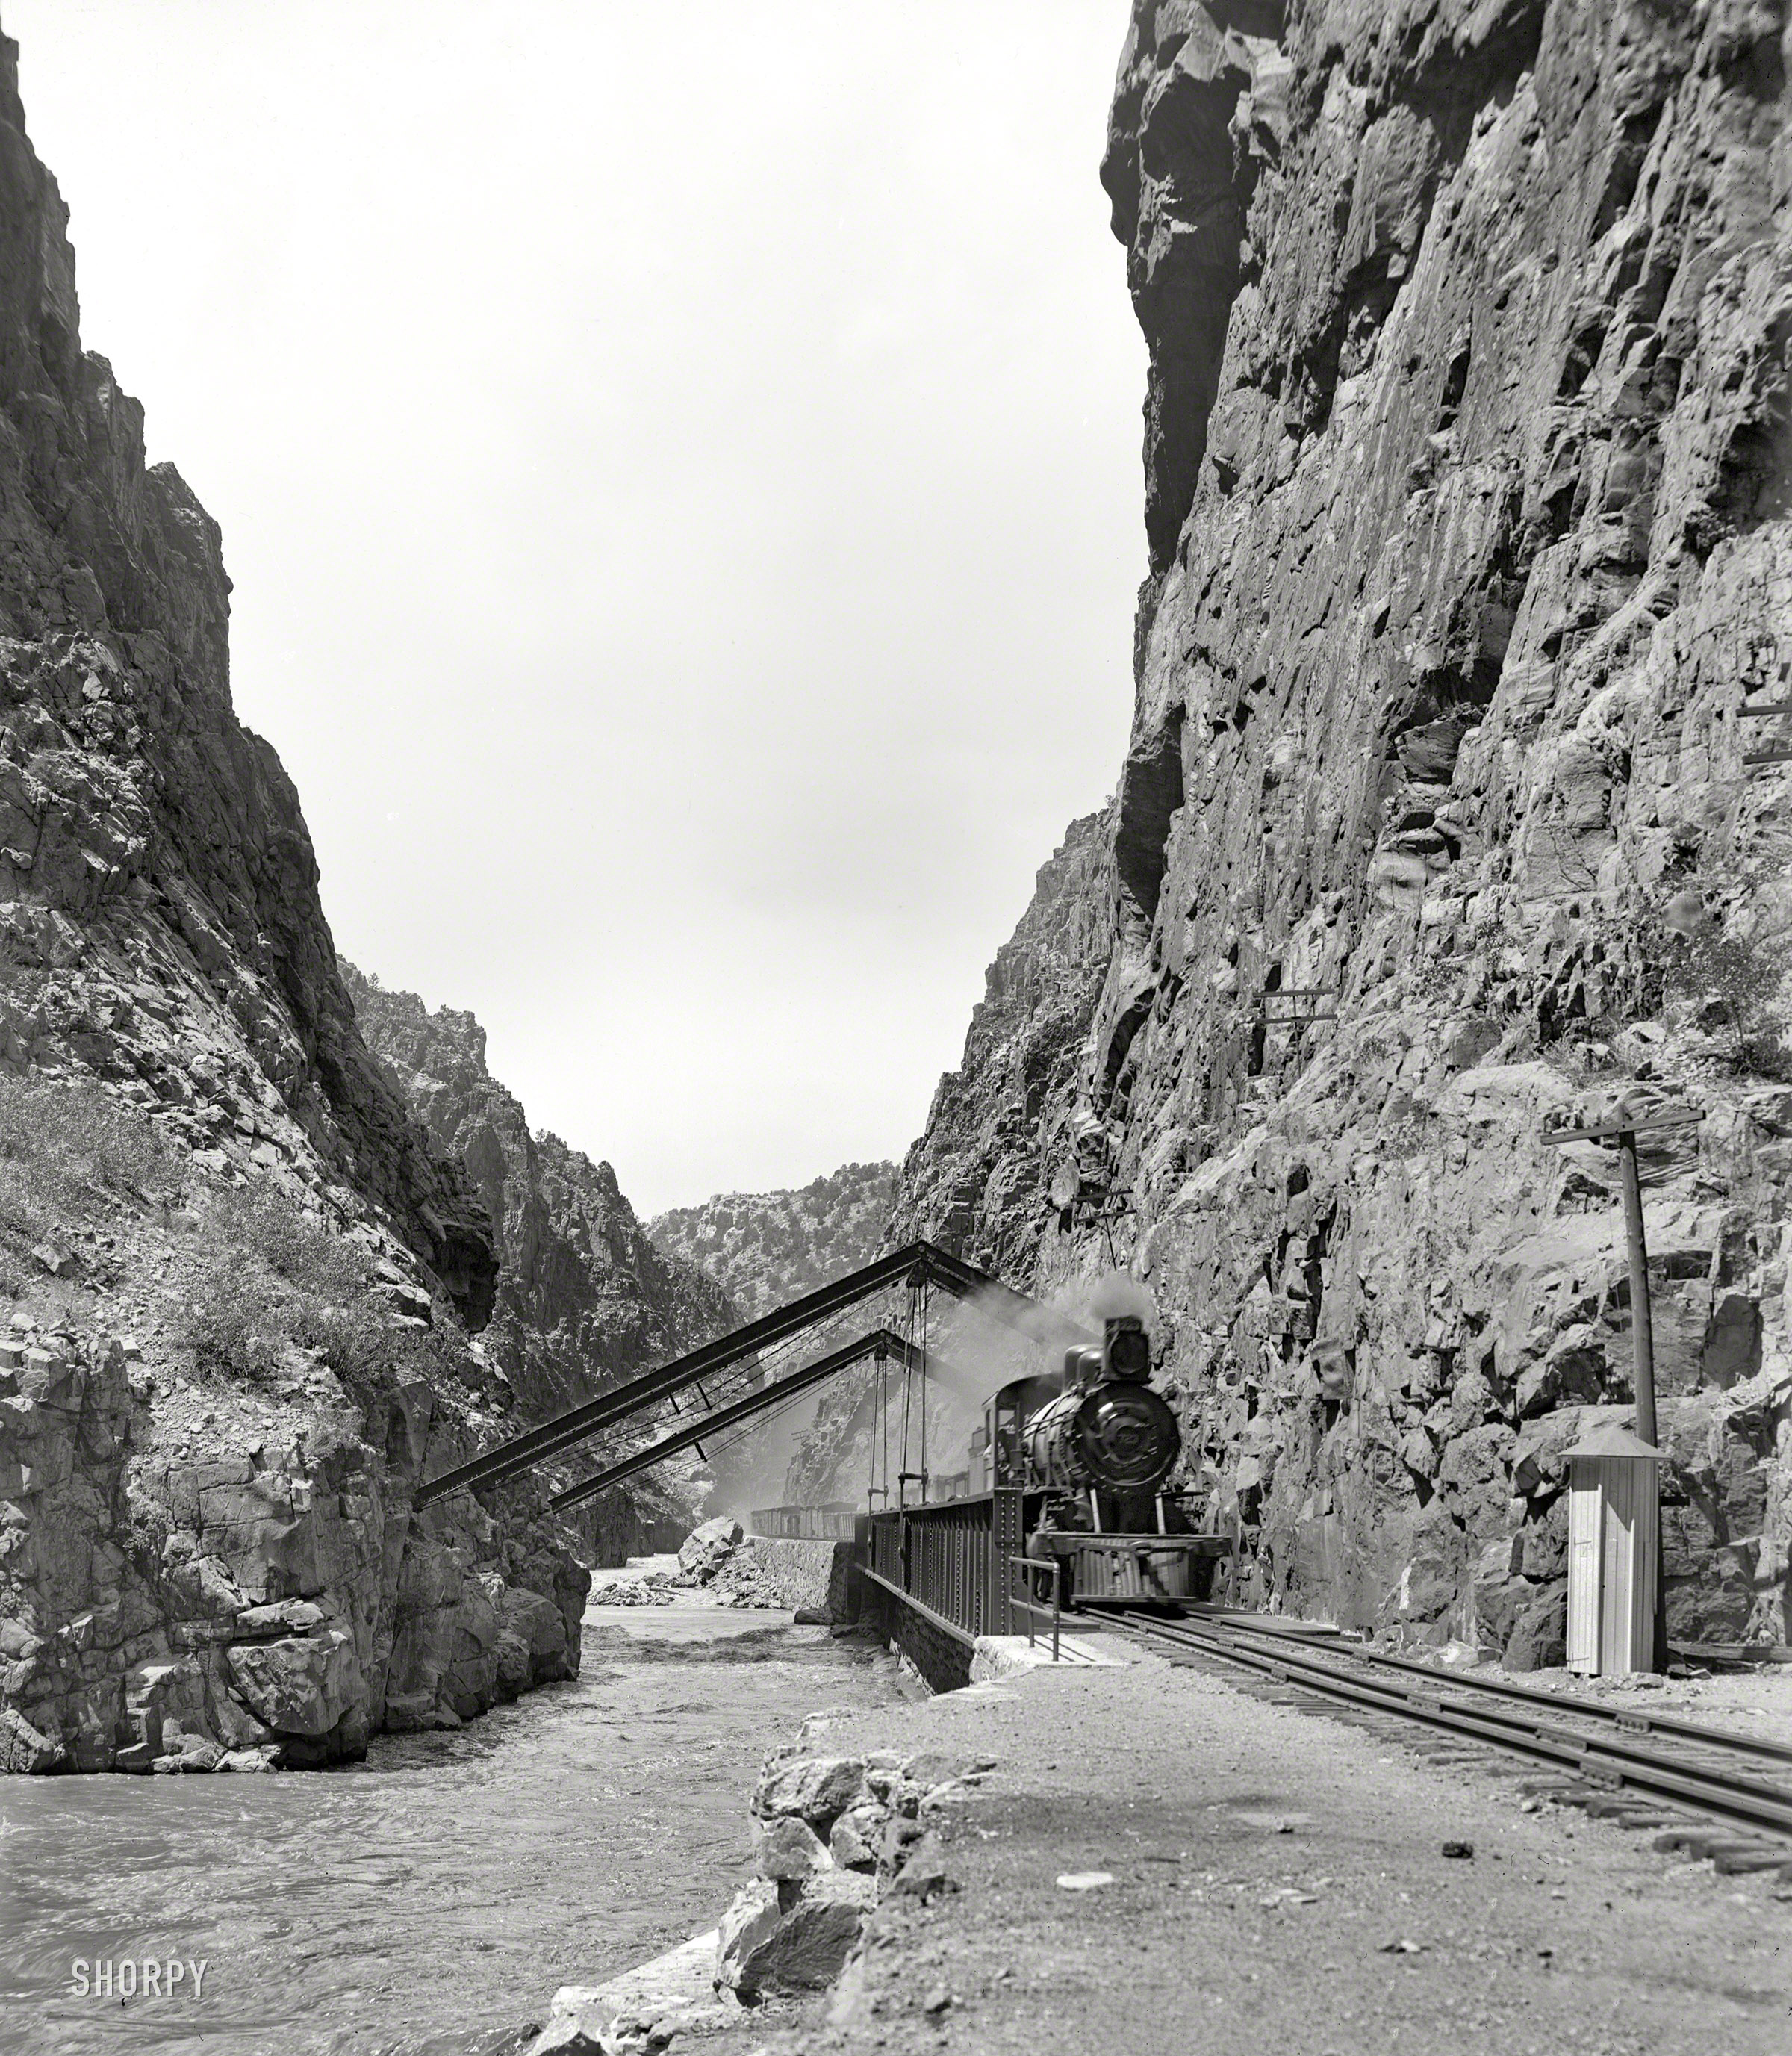 Colorado circa 1900. "In the Royal Gorge, Arkansas River, Rio Grande Southern Railway." 8x10 glass negative by William Henry Jackson. View full size.